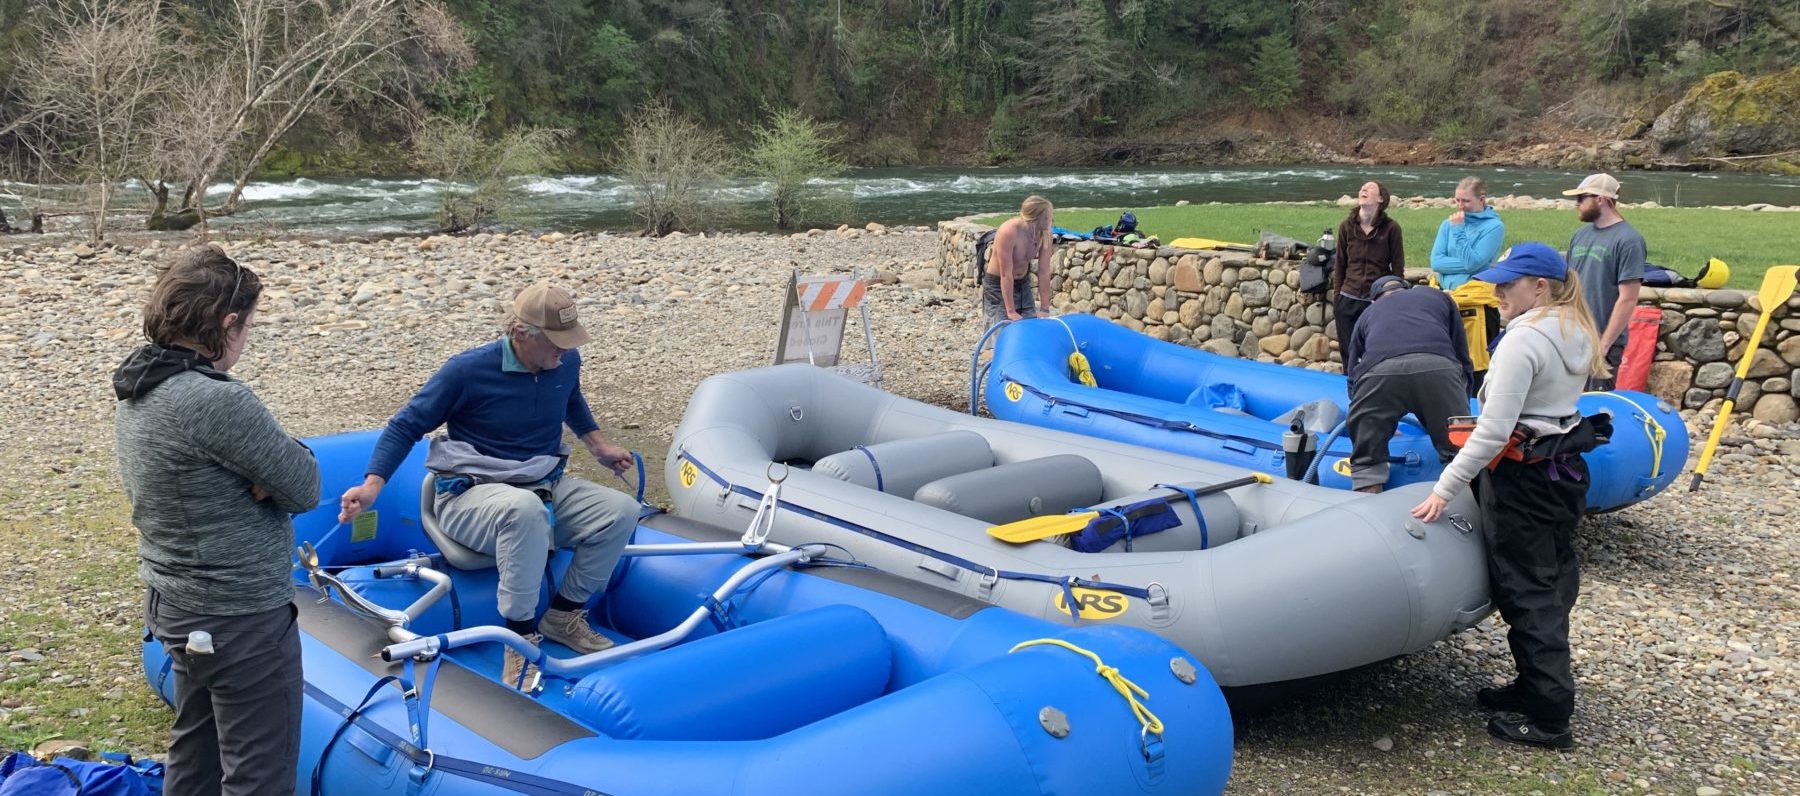 Whitewater Raft Materials and Designs